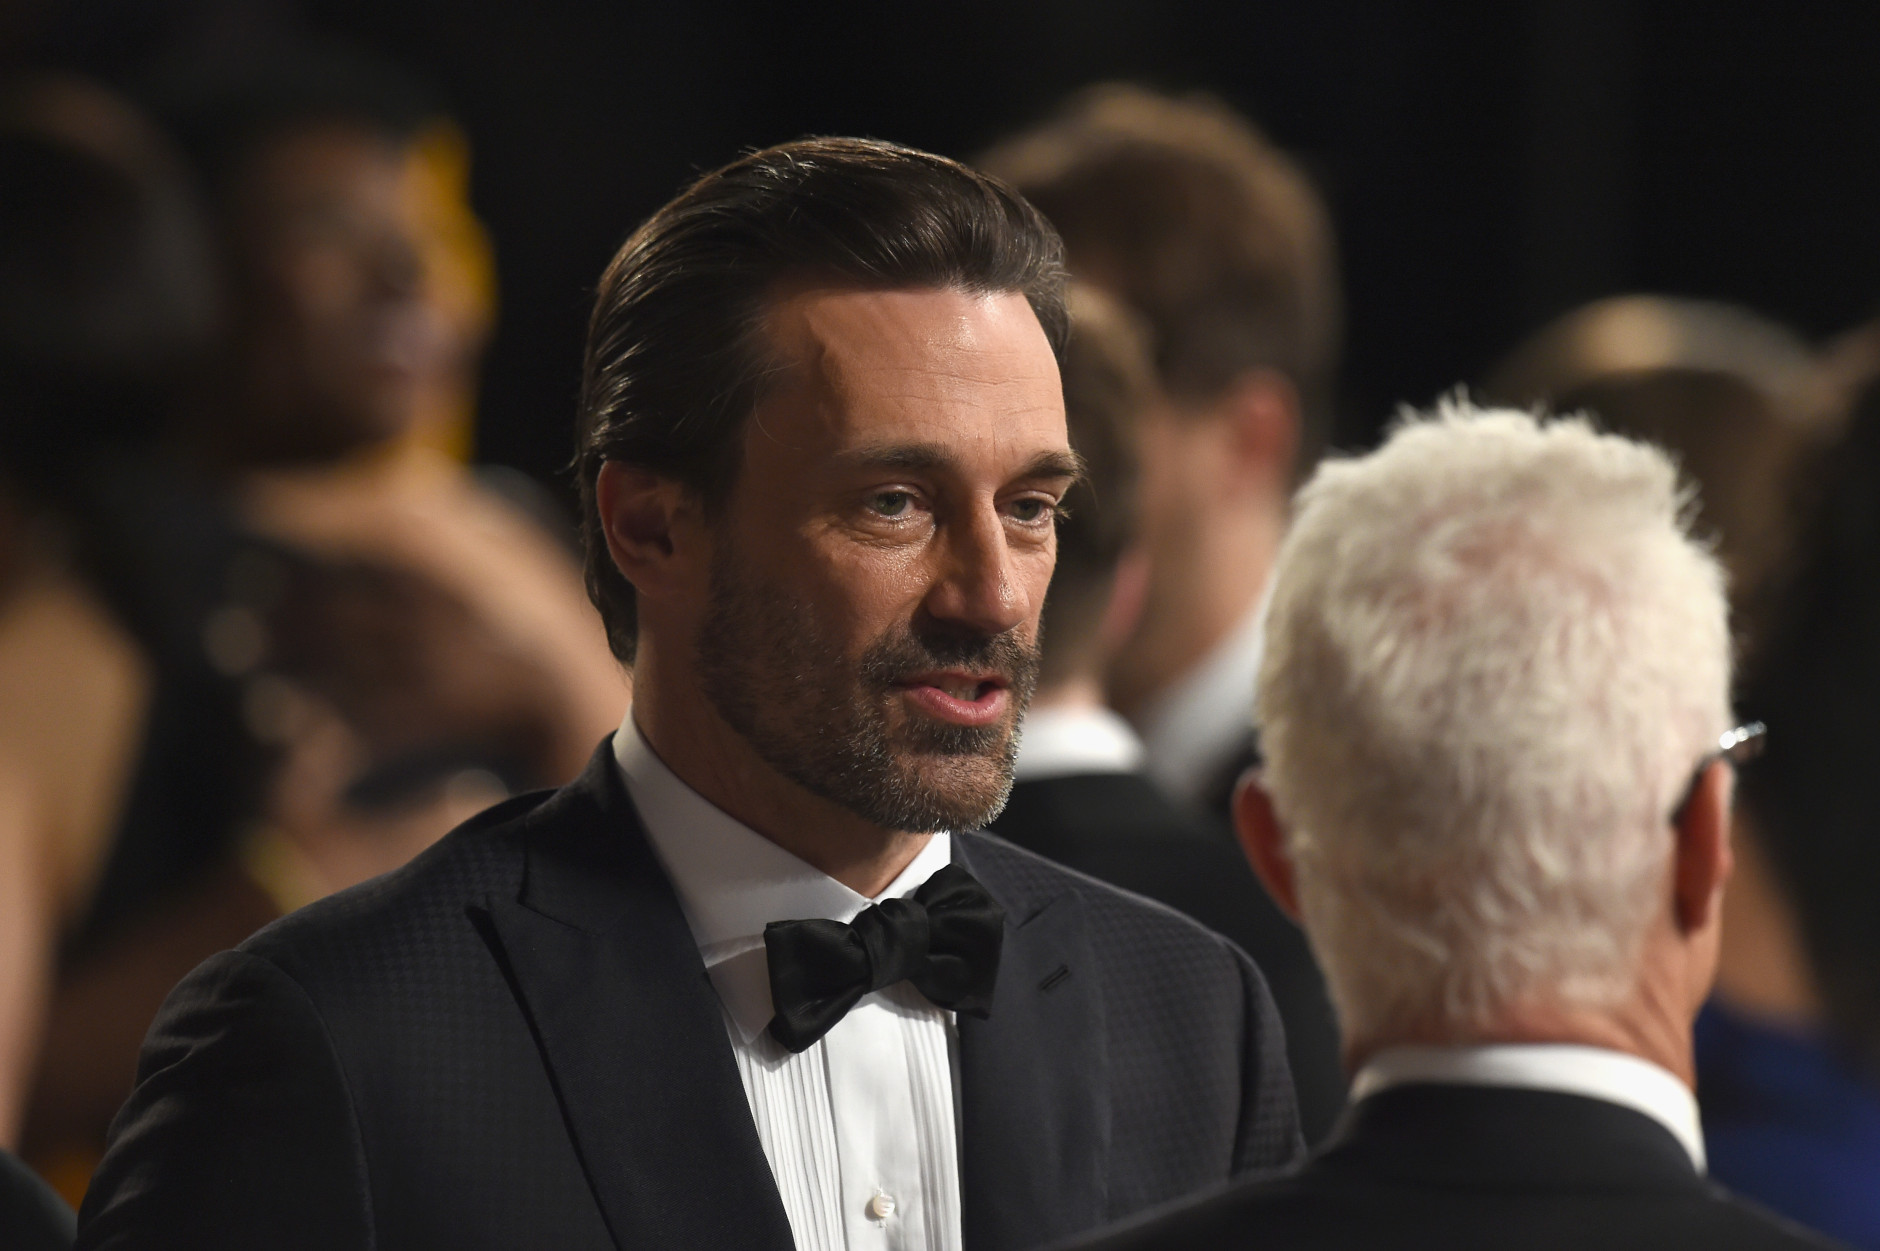 LOS ANGELES, CA - JANUARY 30:  Actors Jon Hamm (L) and John Slattery attend The 22nd Annual Screen Actors Guild Awards at The Shrine Auditorium on January 30, 2016 in Los Angeles, California. 25650_021  (Photo by Kevin Winter/Getty Images for Turner)